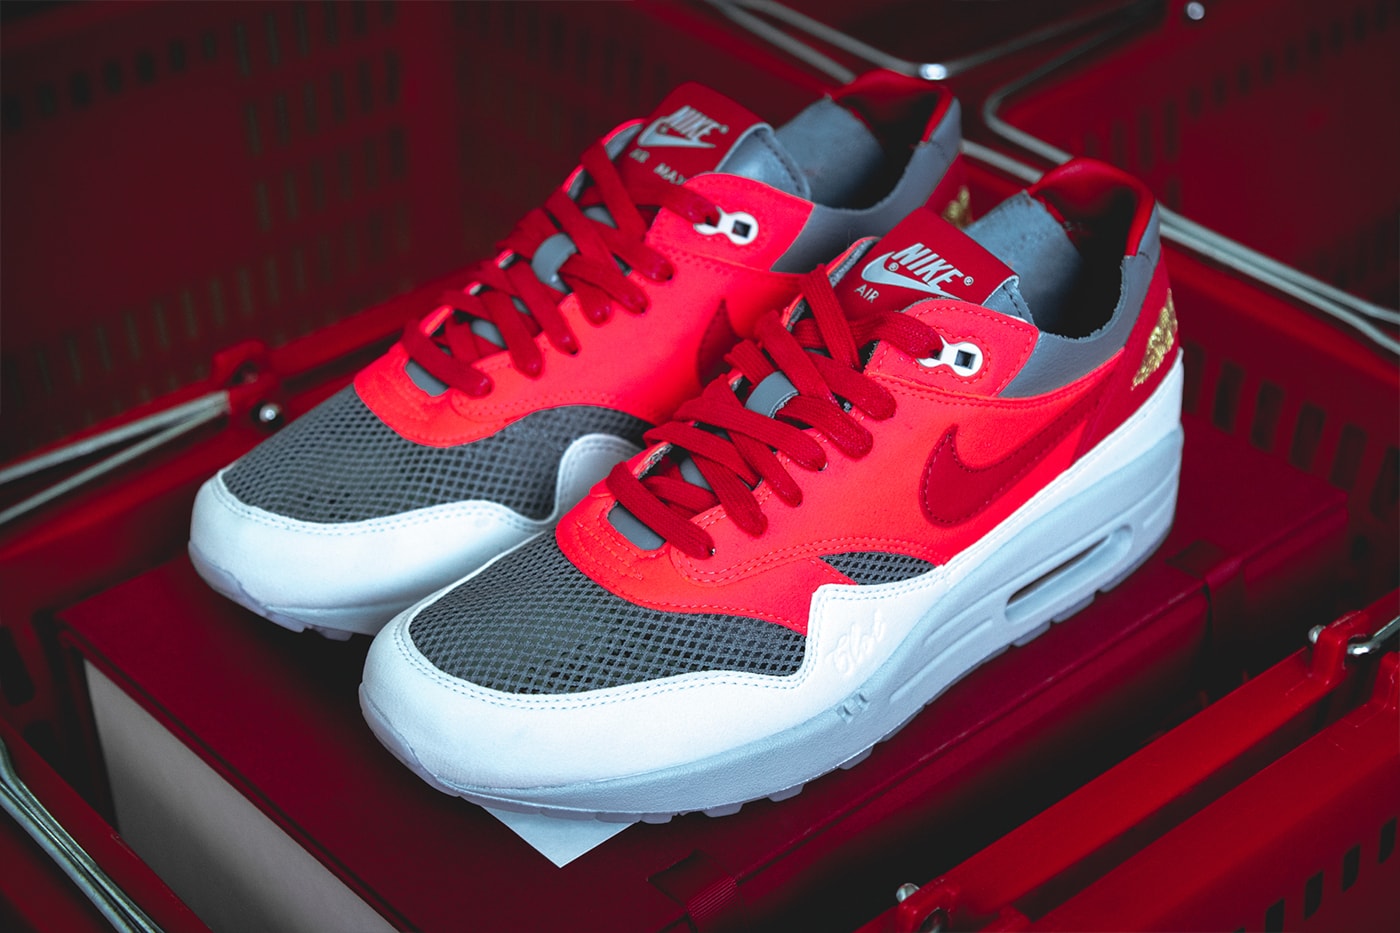 CLOT Nike Air Max 1 K.O.D. Solar Red Closer Look Release Info DD1870-600 Kevin Poon Edison Chen